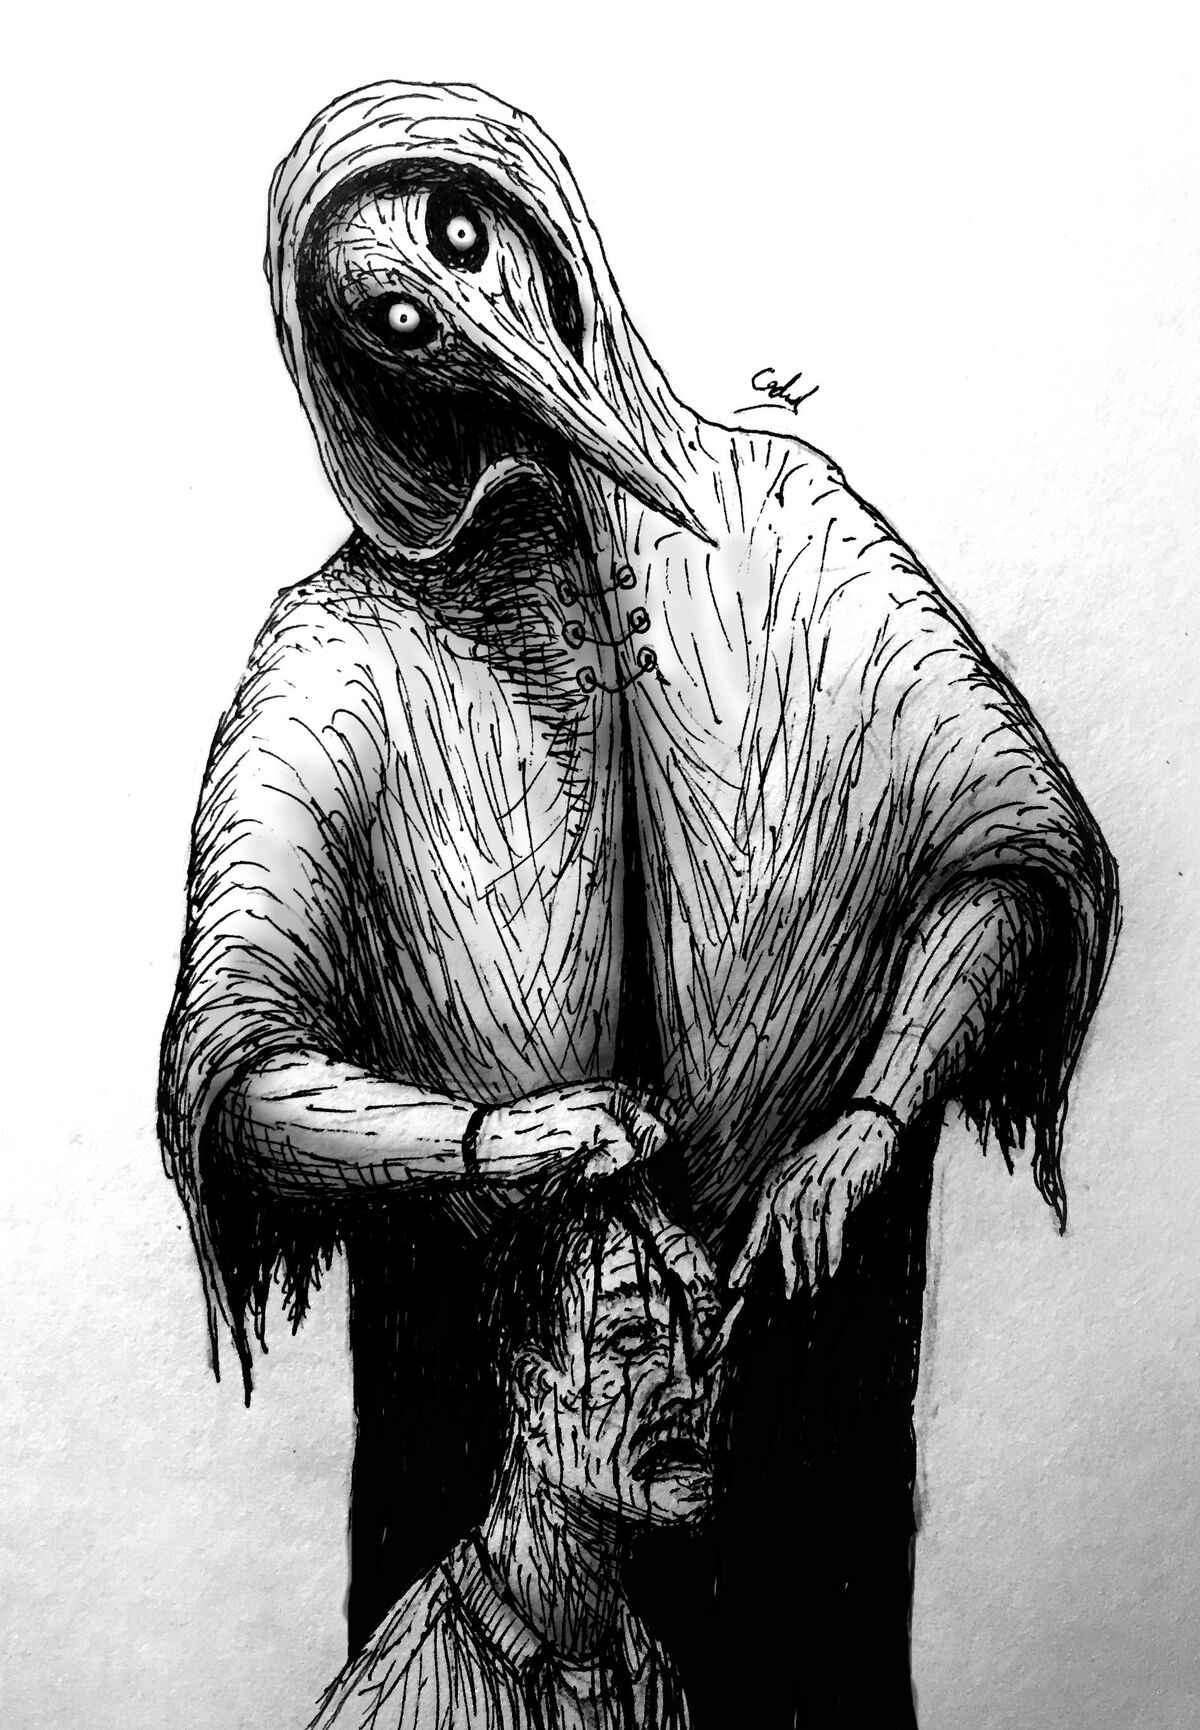 SCP-106 (Canon, Composite)/Gewsbumpz dude, Character Stats and Profiles  Wiki